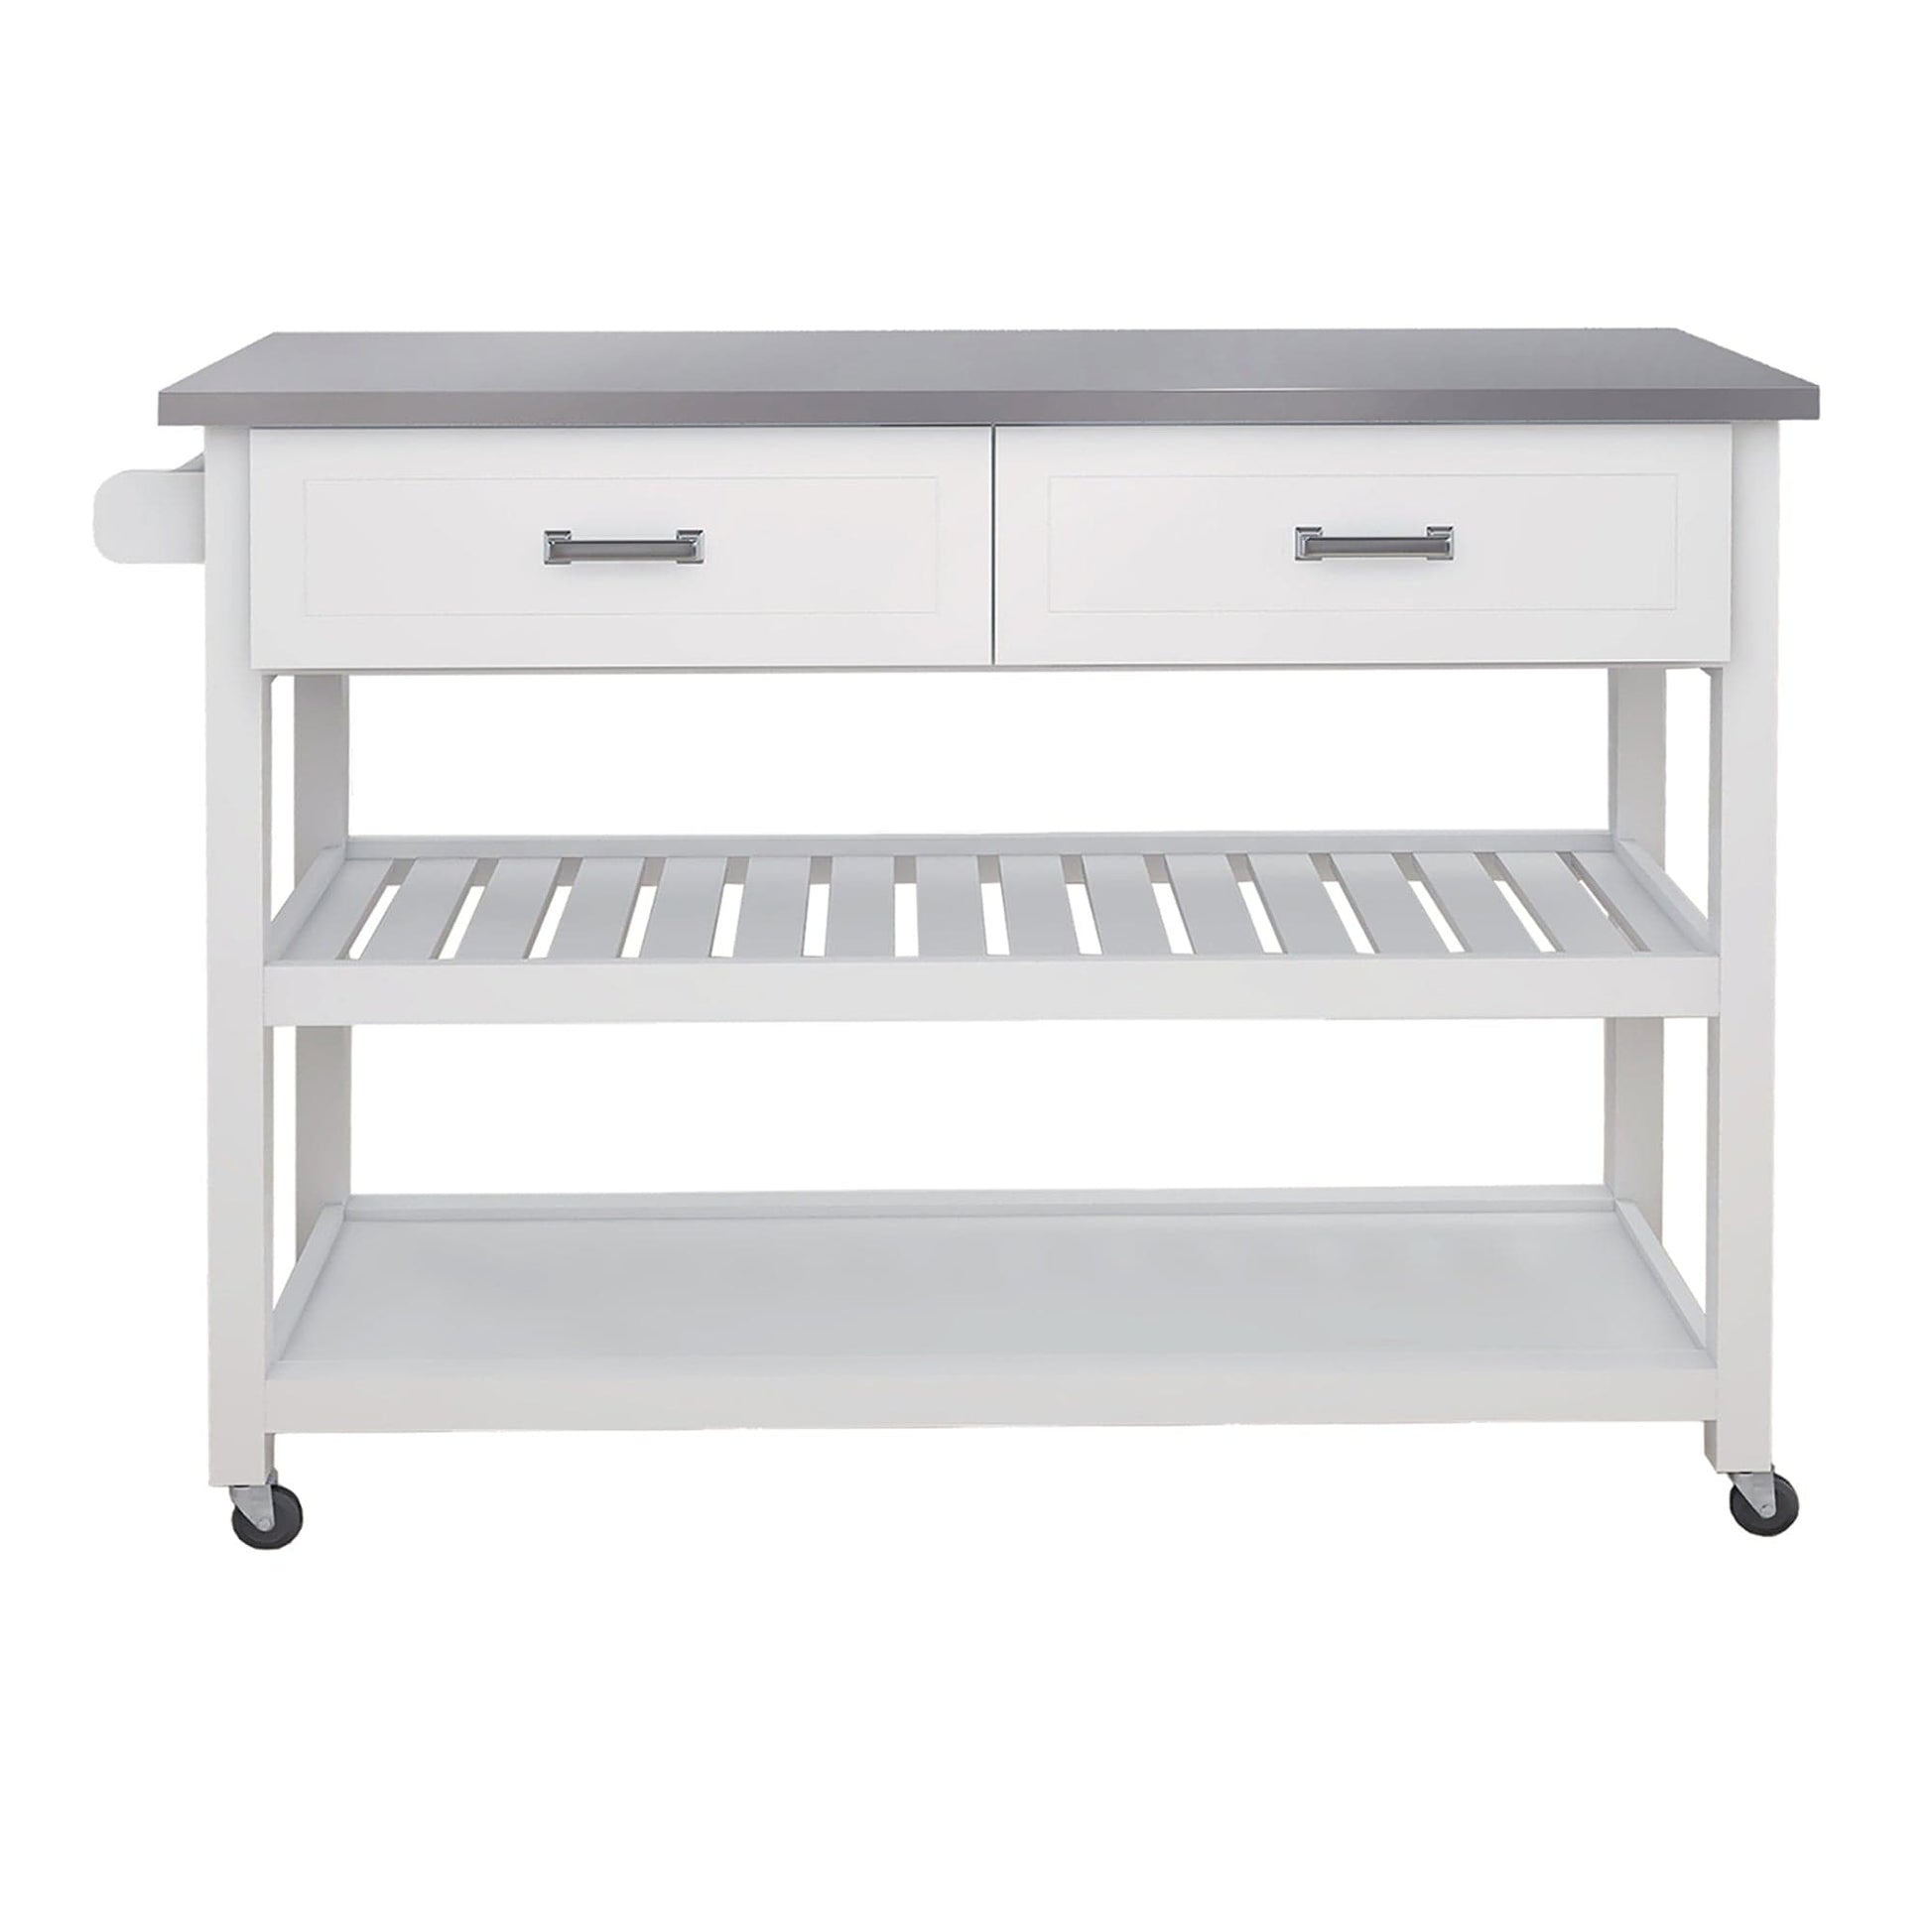 1st Choice Furniture Direct 1st Choice Stylish Organization Stainless Steel Table Top White Kitchen Cart